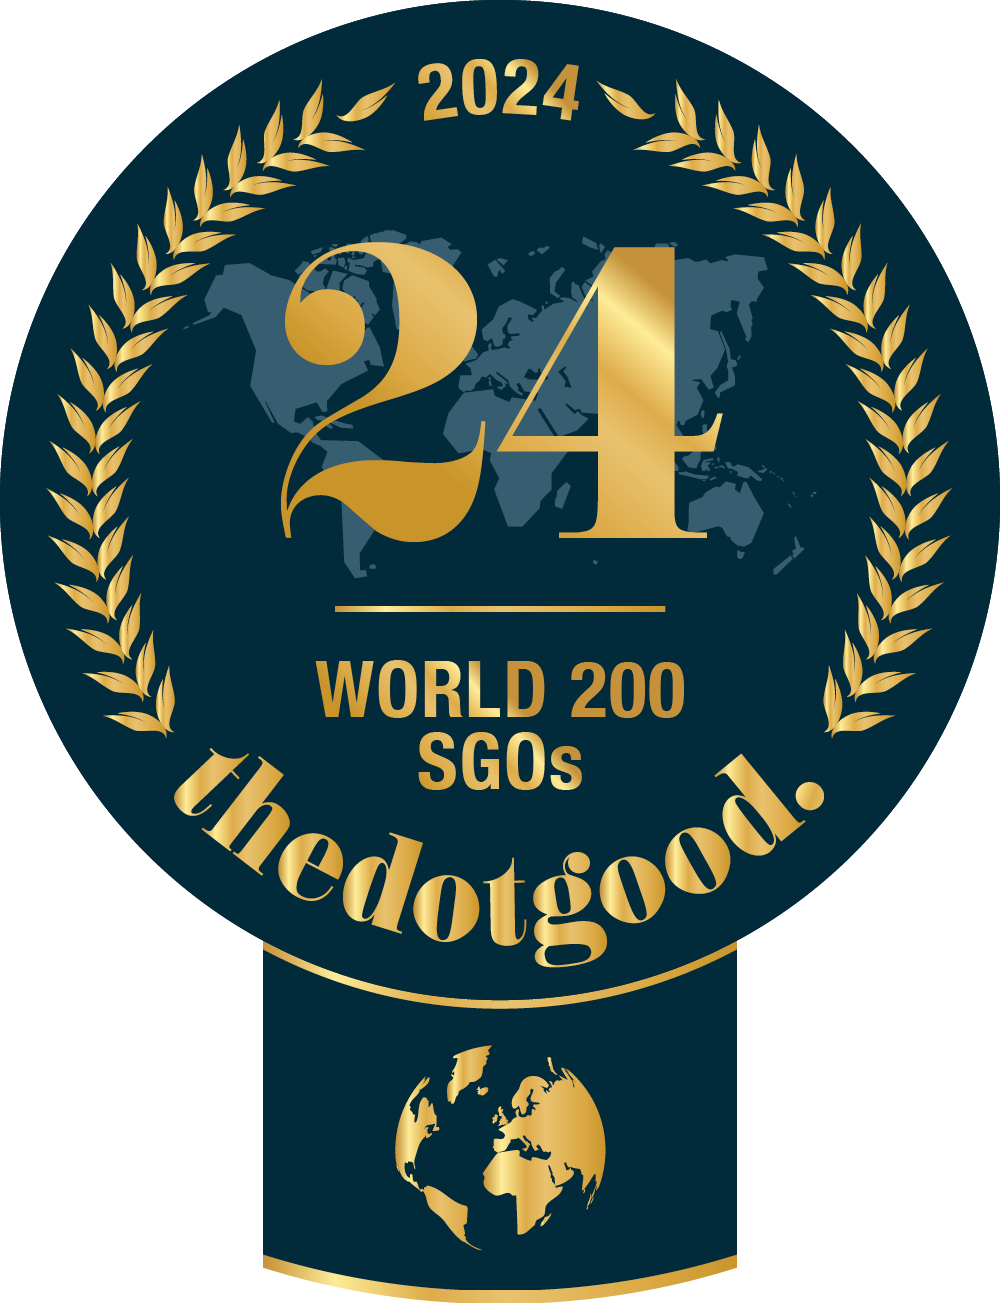 GENERATIONS FOR PEACE is world ranked on thedotgood.